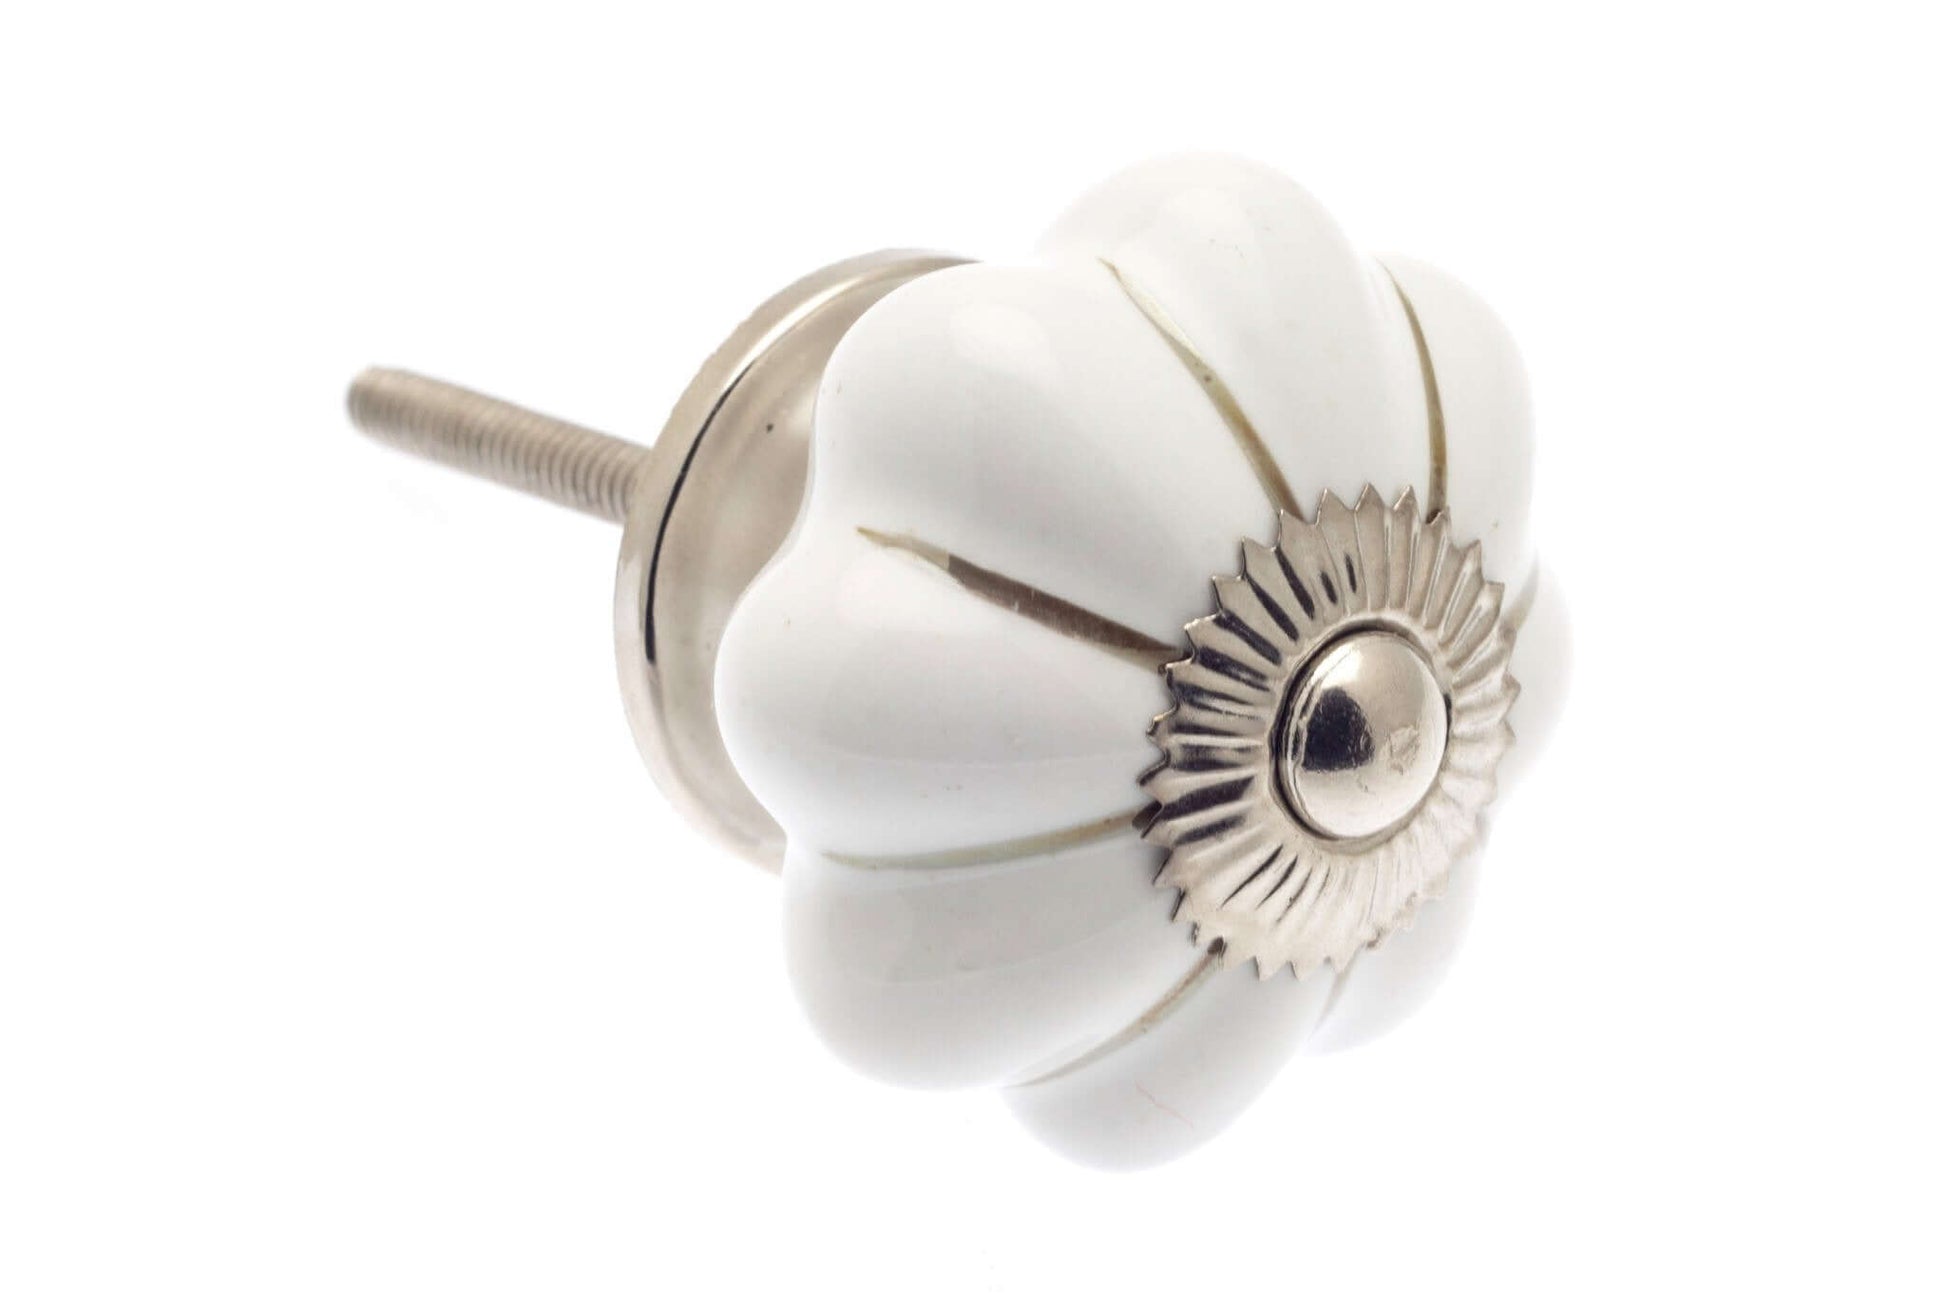 Ceramic Cupboard Knobs - Flower Ceramic Knob White With Silver Lines 42mm (MT-187-ASL)